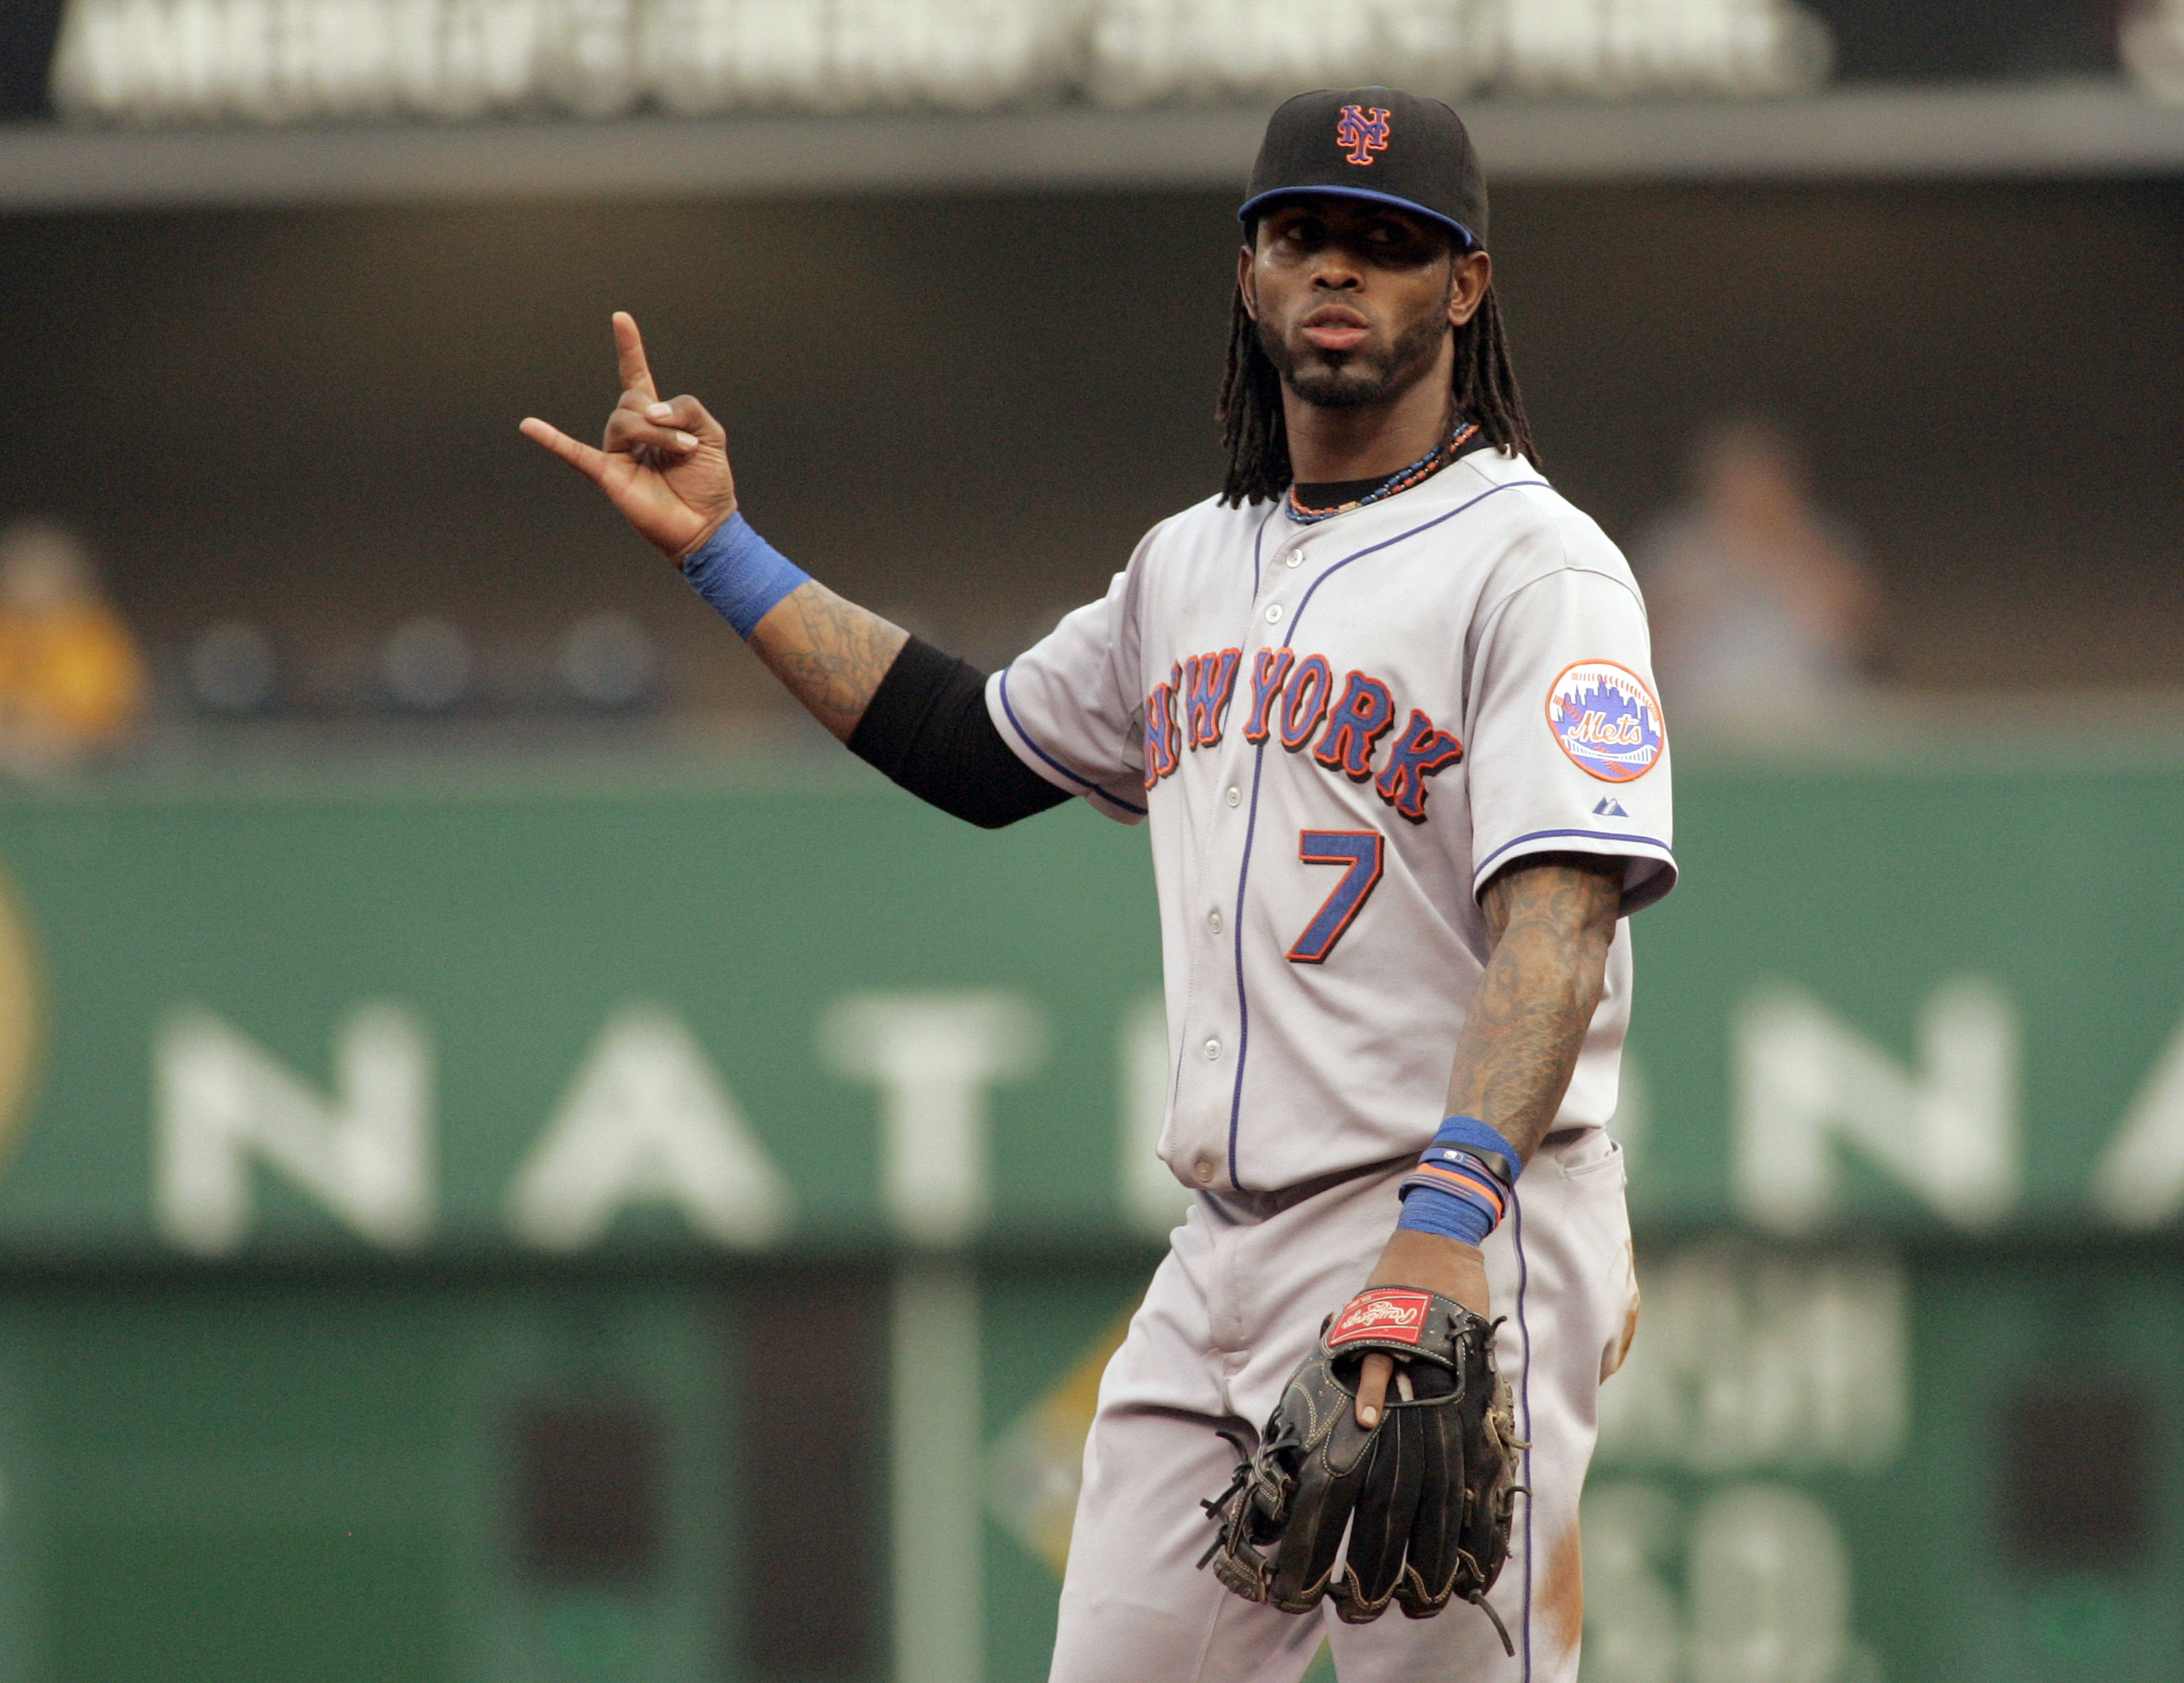 MLB Trade Speculation: Top 5 Teams Who Should Trade for Jose Reyes